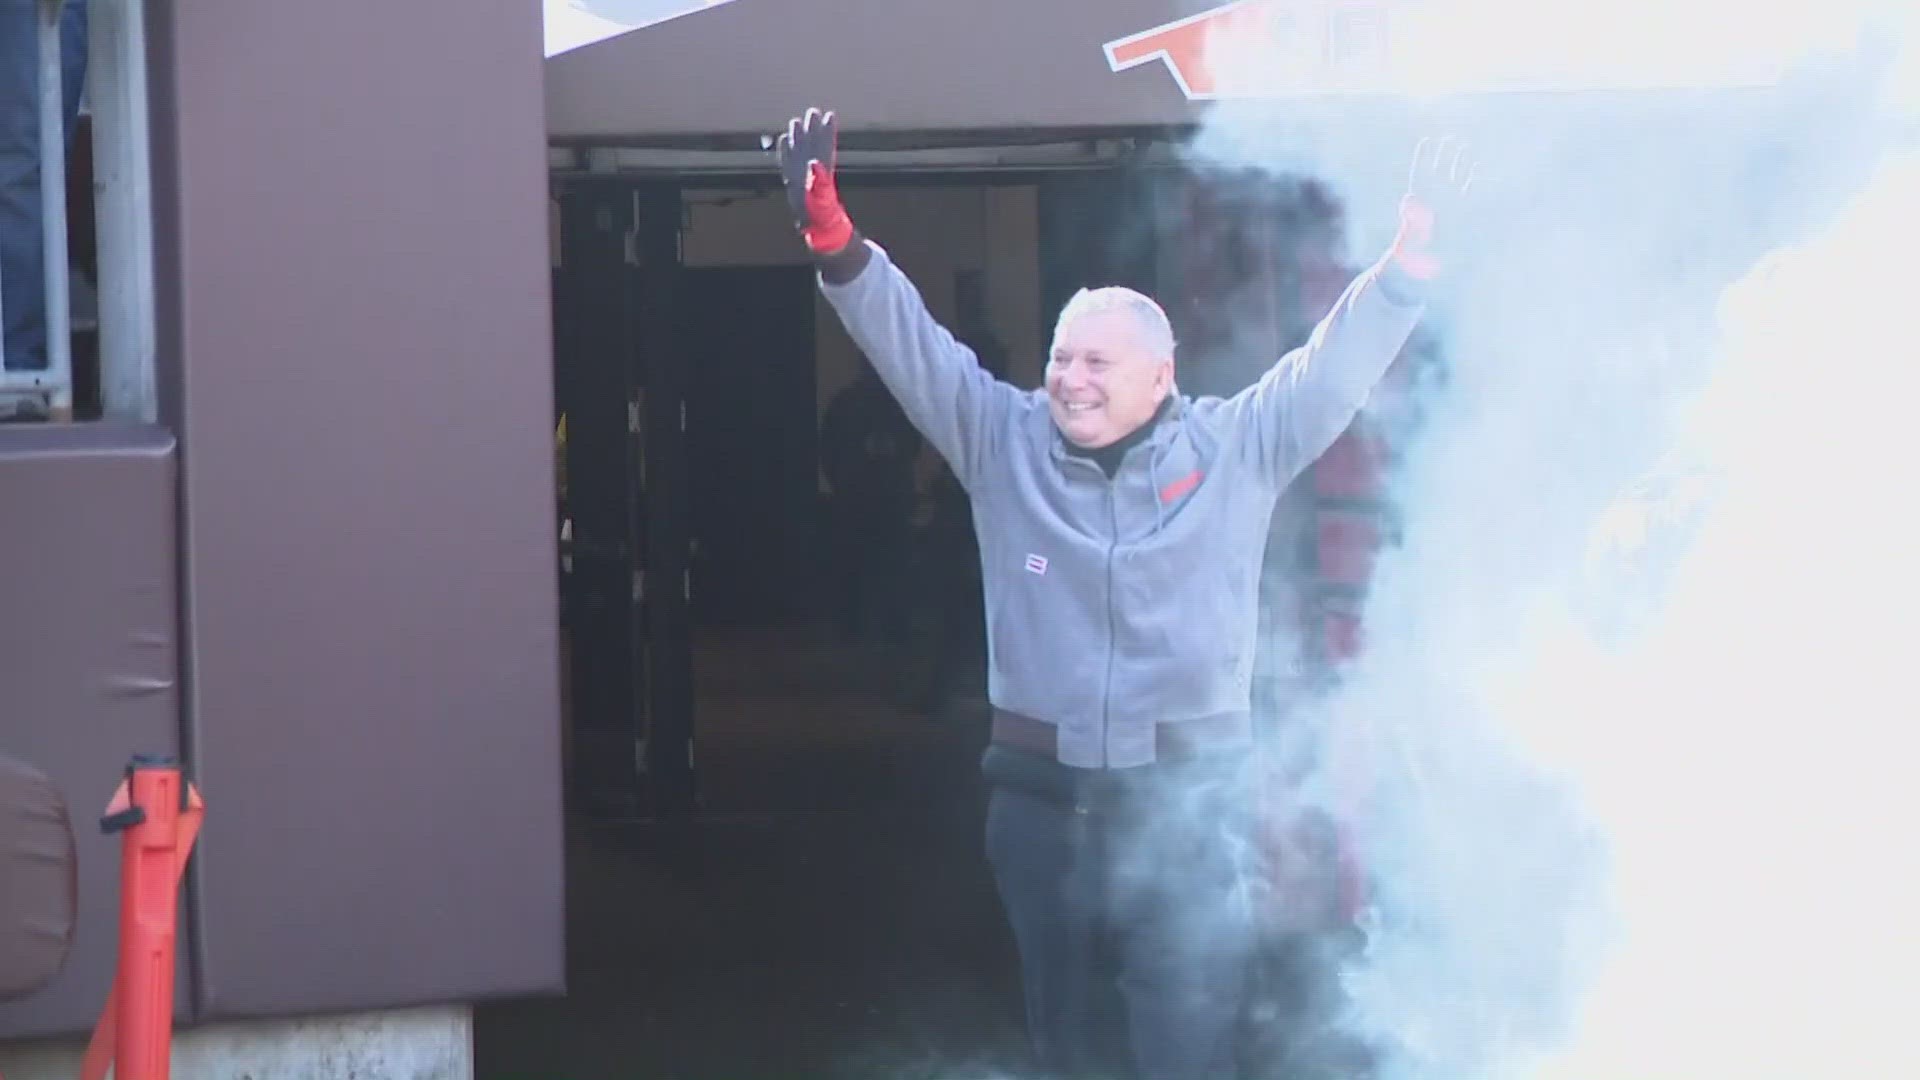 Jimmy joined Laura Caso and Jay Crawford for a look back at his return to the Browns following his leukemia treatment.